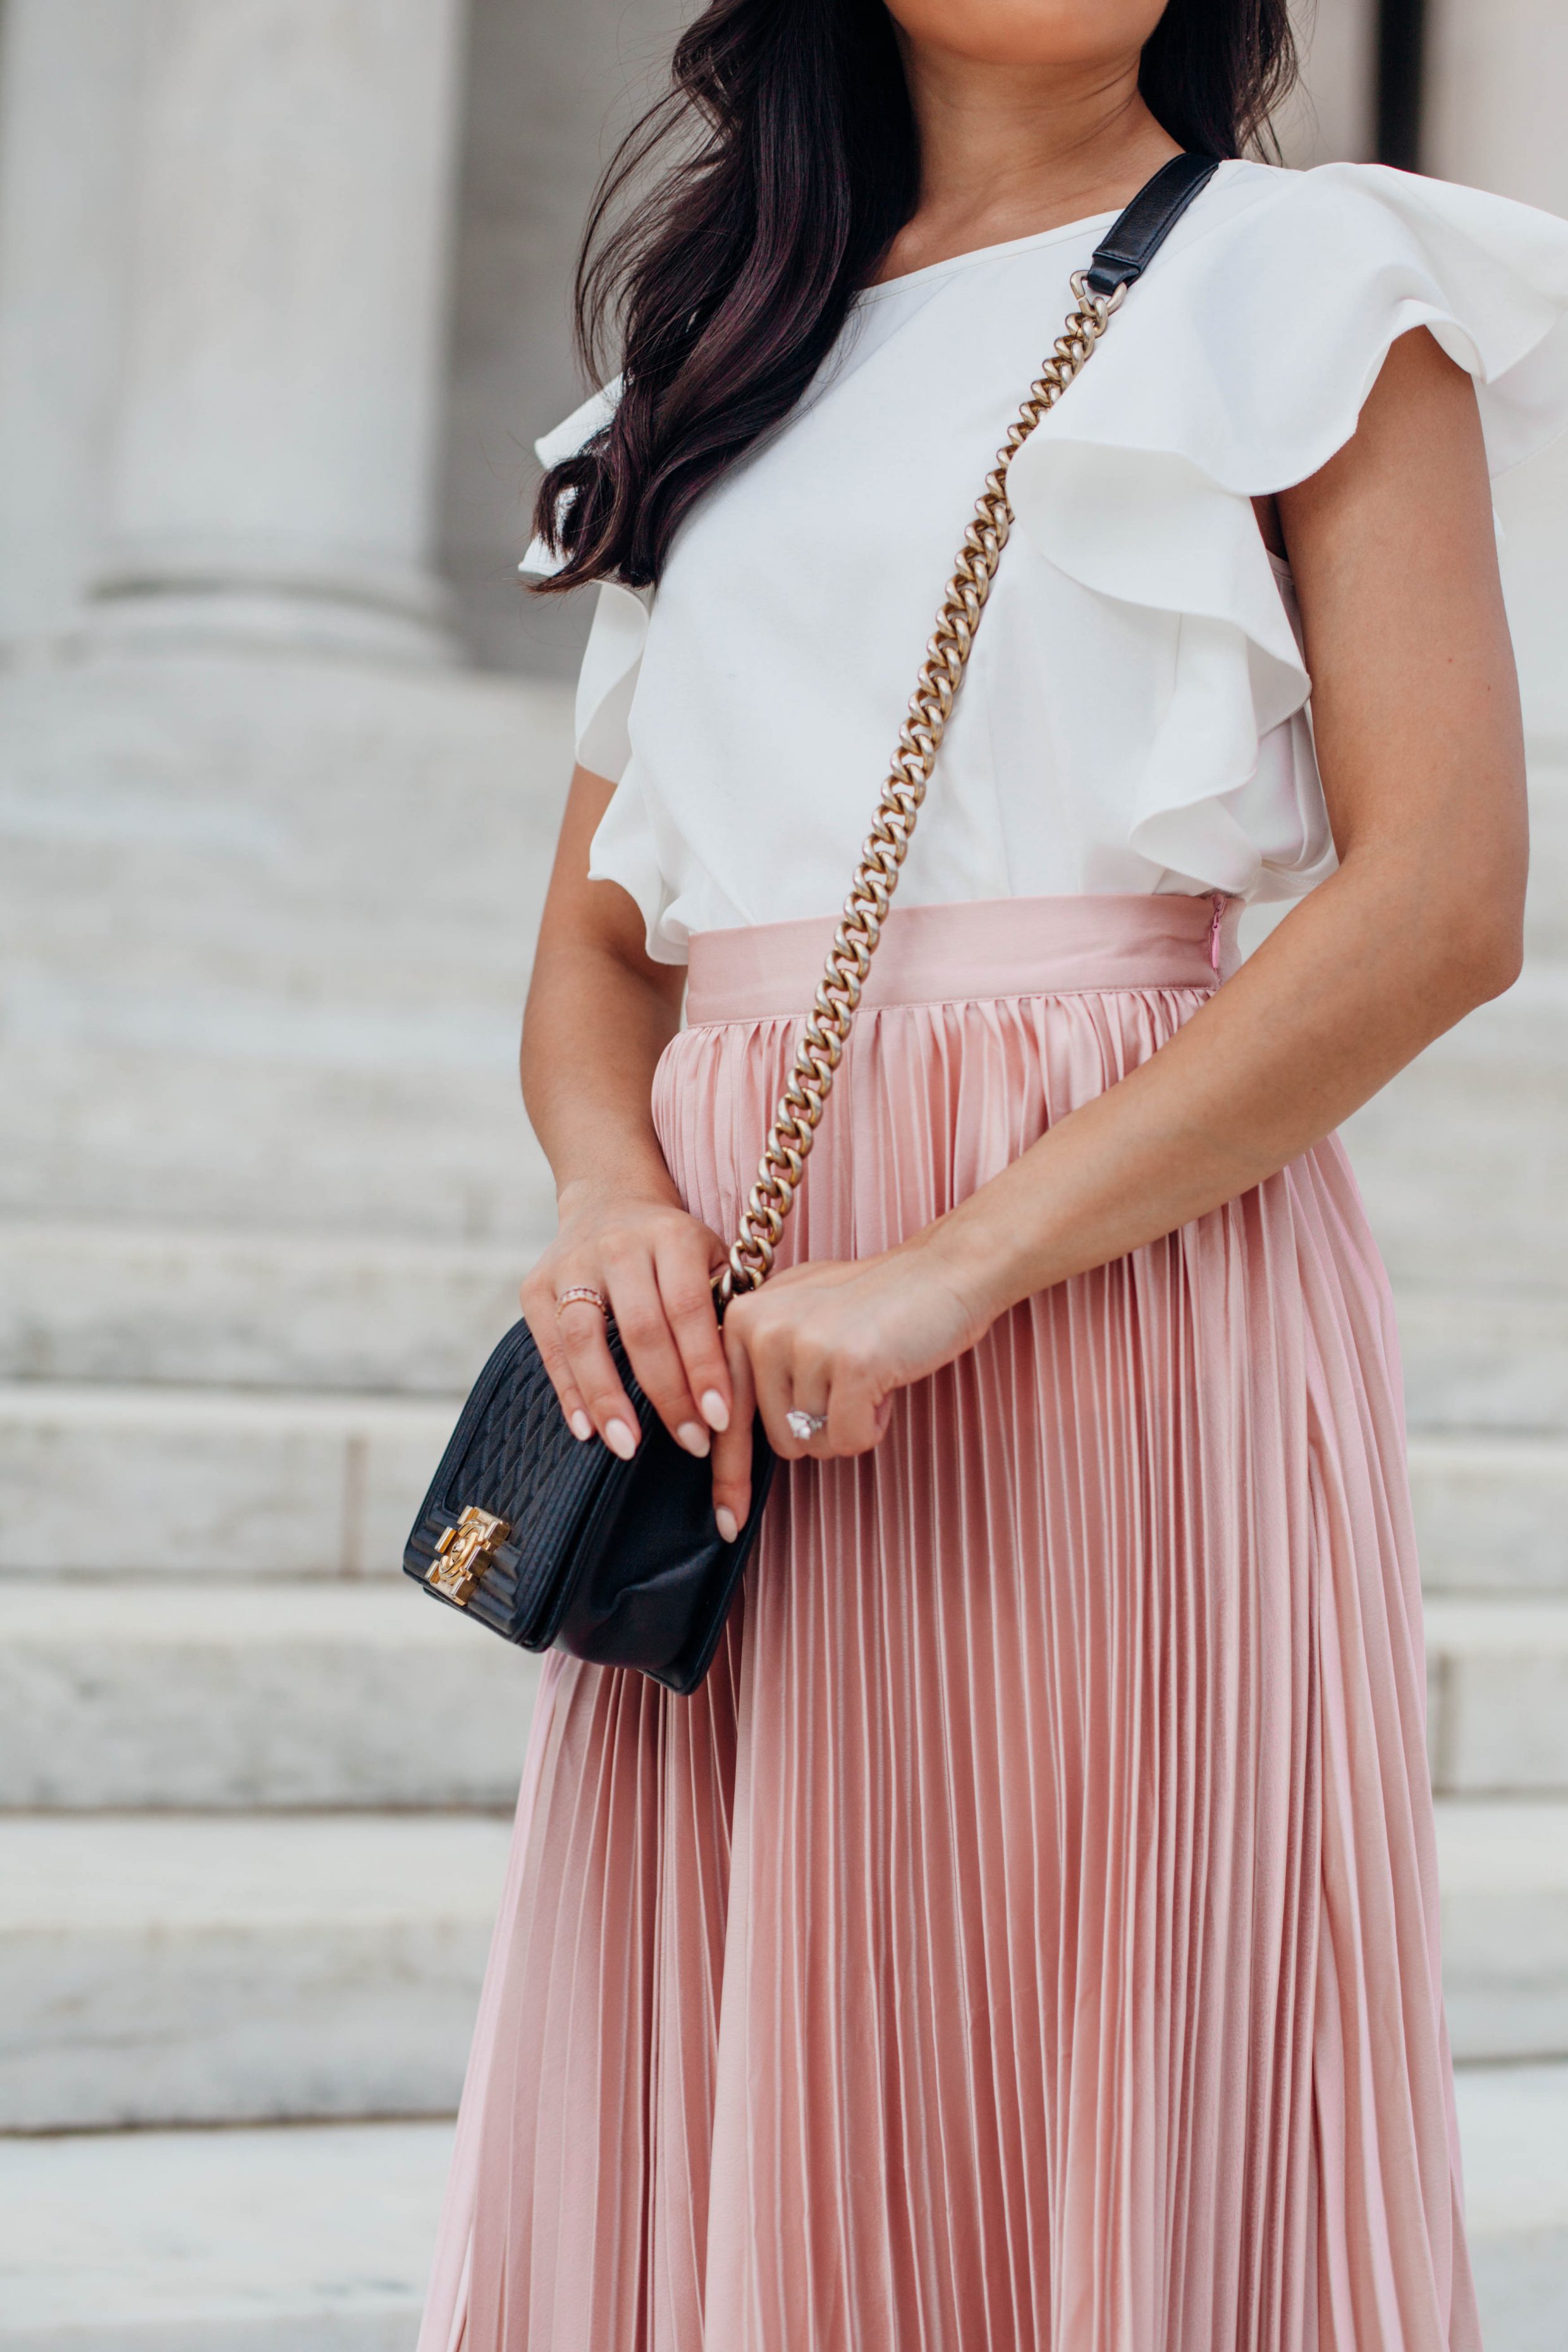 COLOR & CHIC | Pink Pleated Maxi Skirt and Chanel Boy Bag